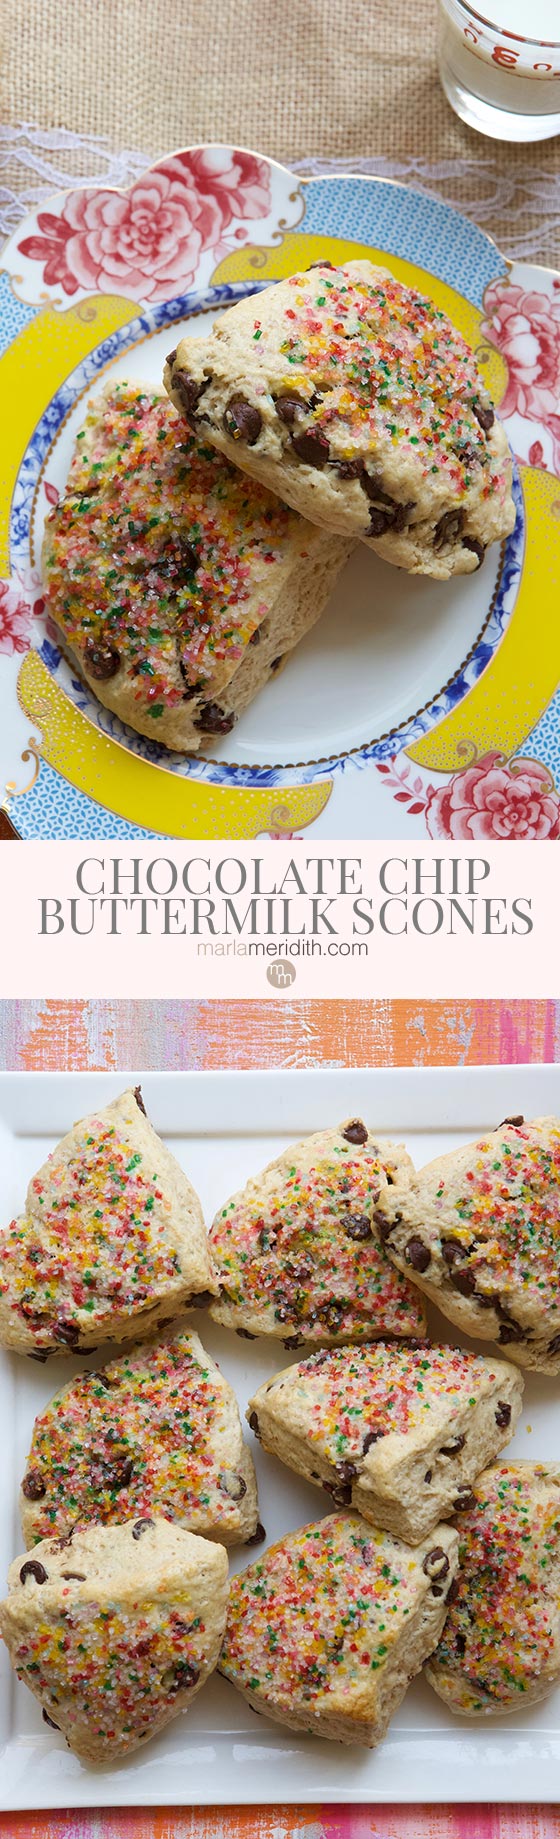 We love this easy recipe for Chocolate Chip Buttermilk scones. Great for breakfast, brunch and afternoon snacks. A fun baking project with the kids too! MarlaMeridith.com